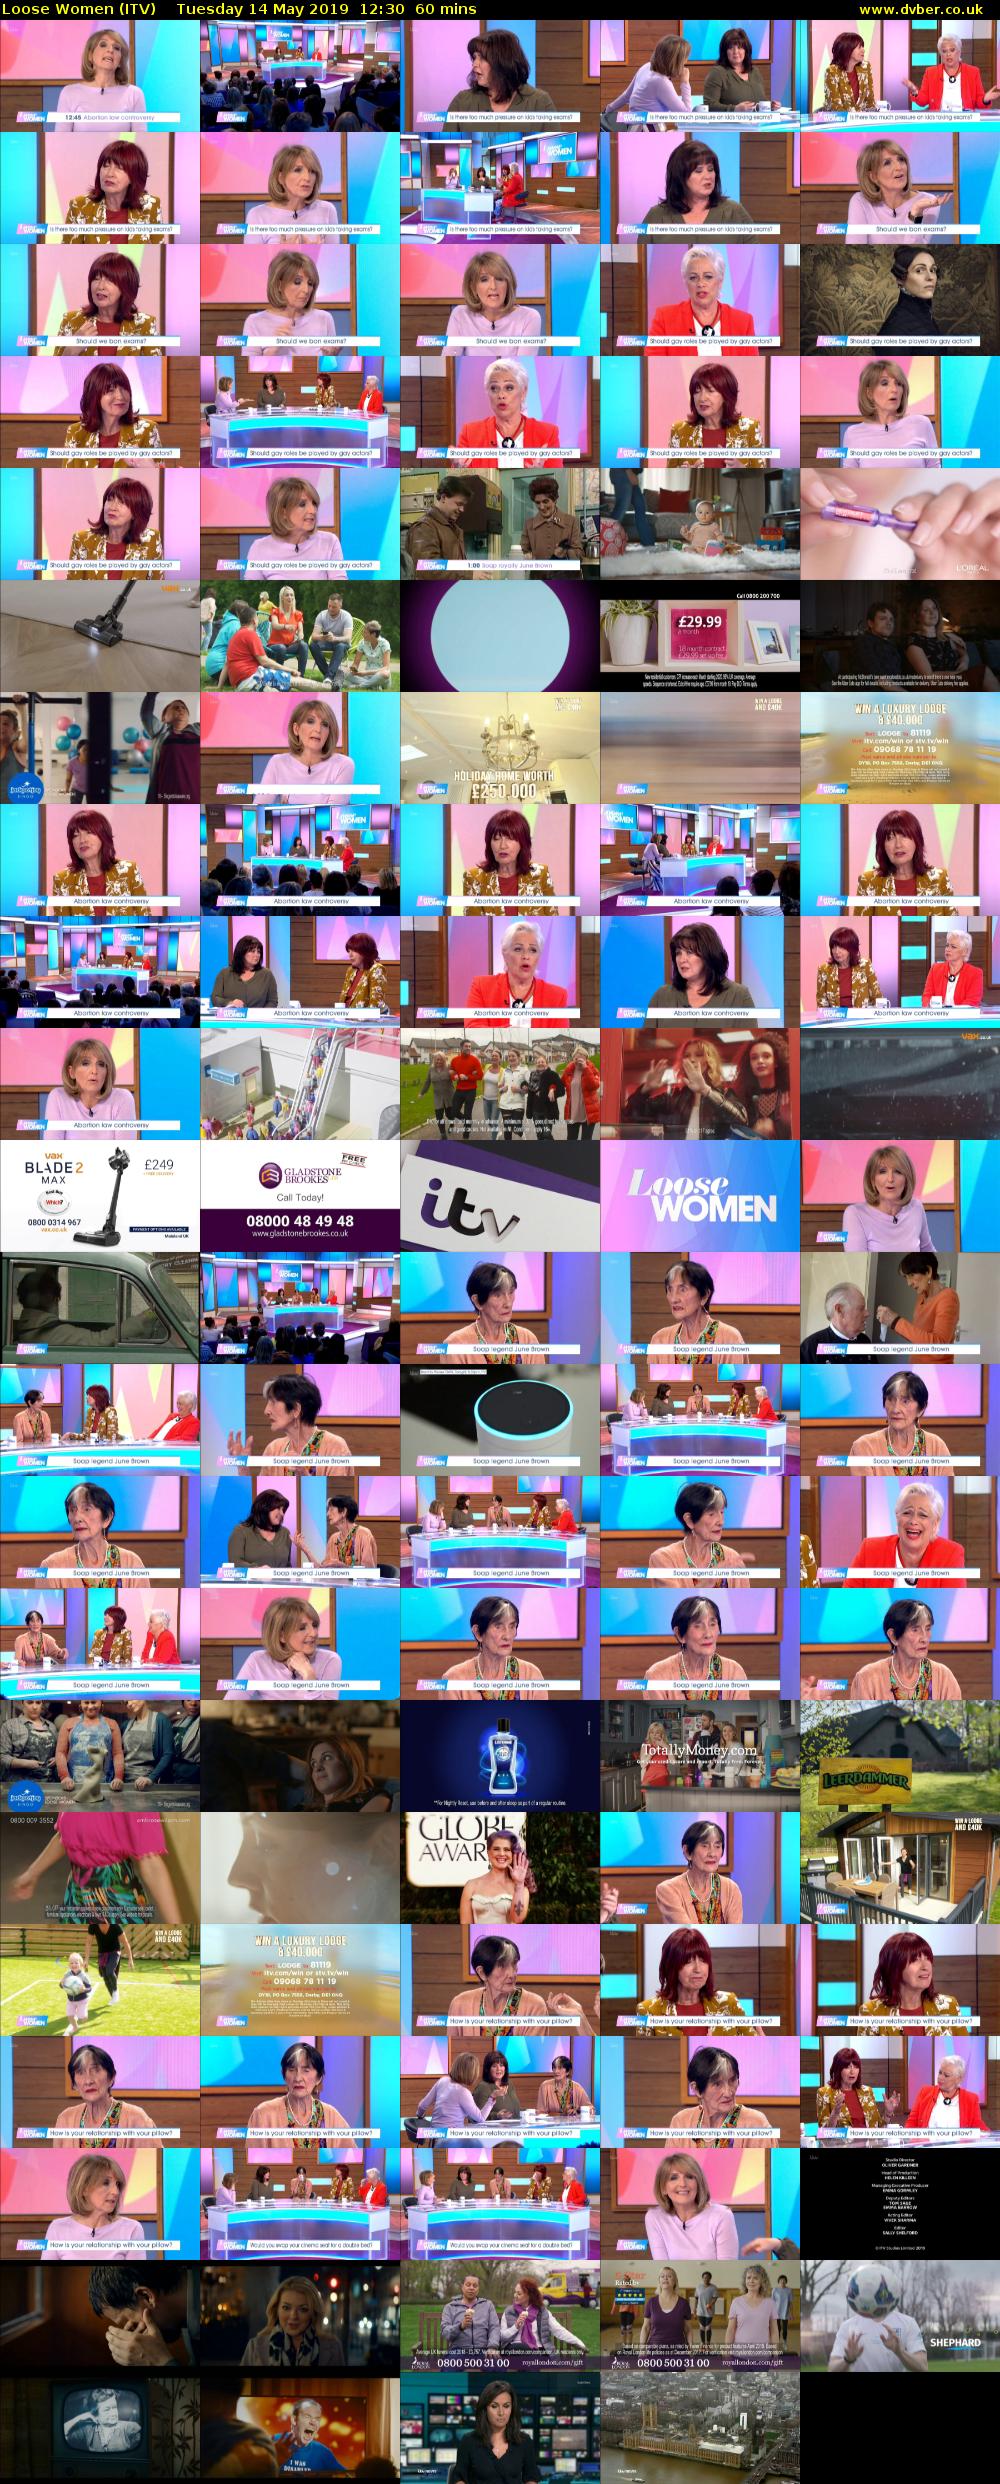 Loose Women (ITV) Tuesday 14 May 2019 12:30 - 13:30